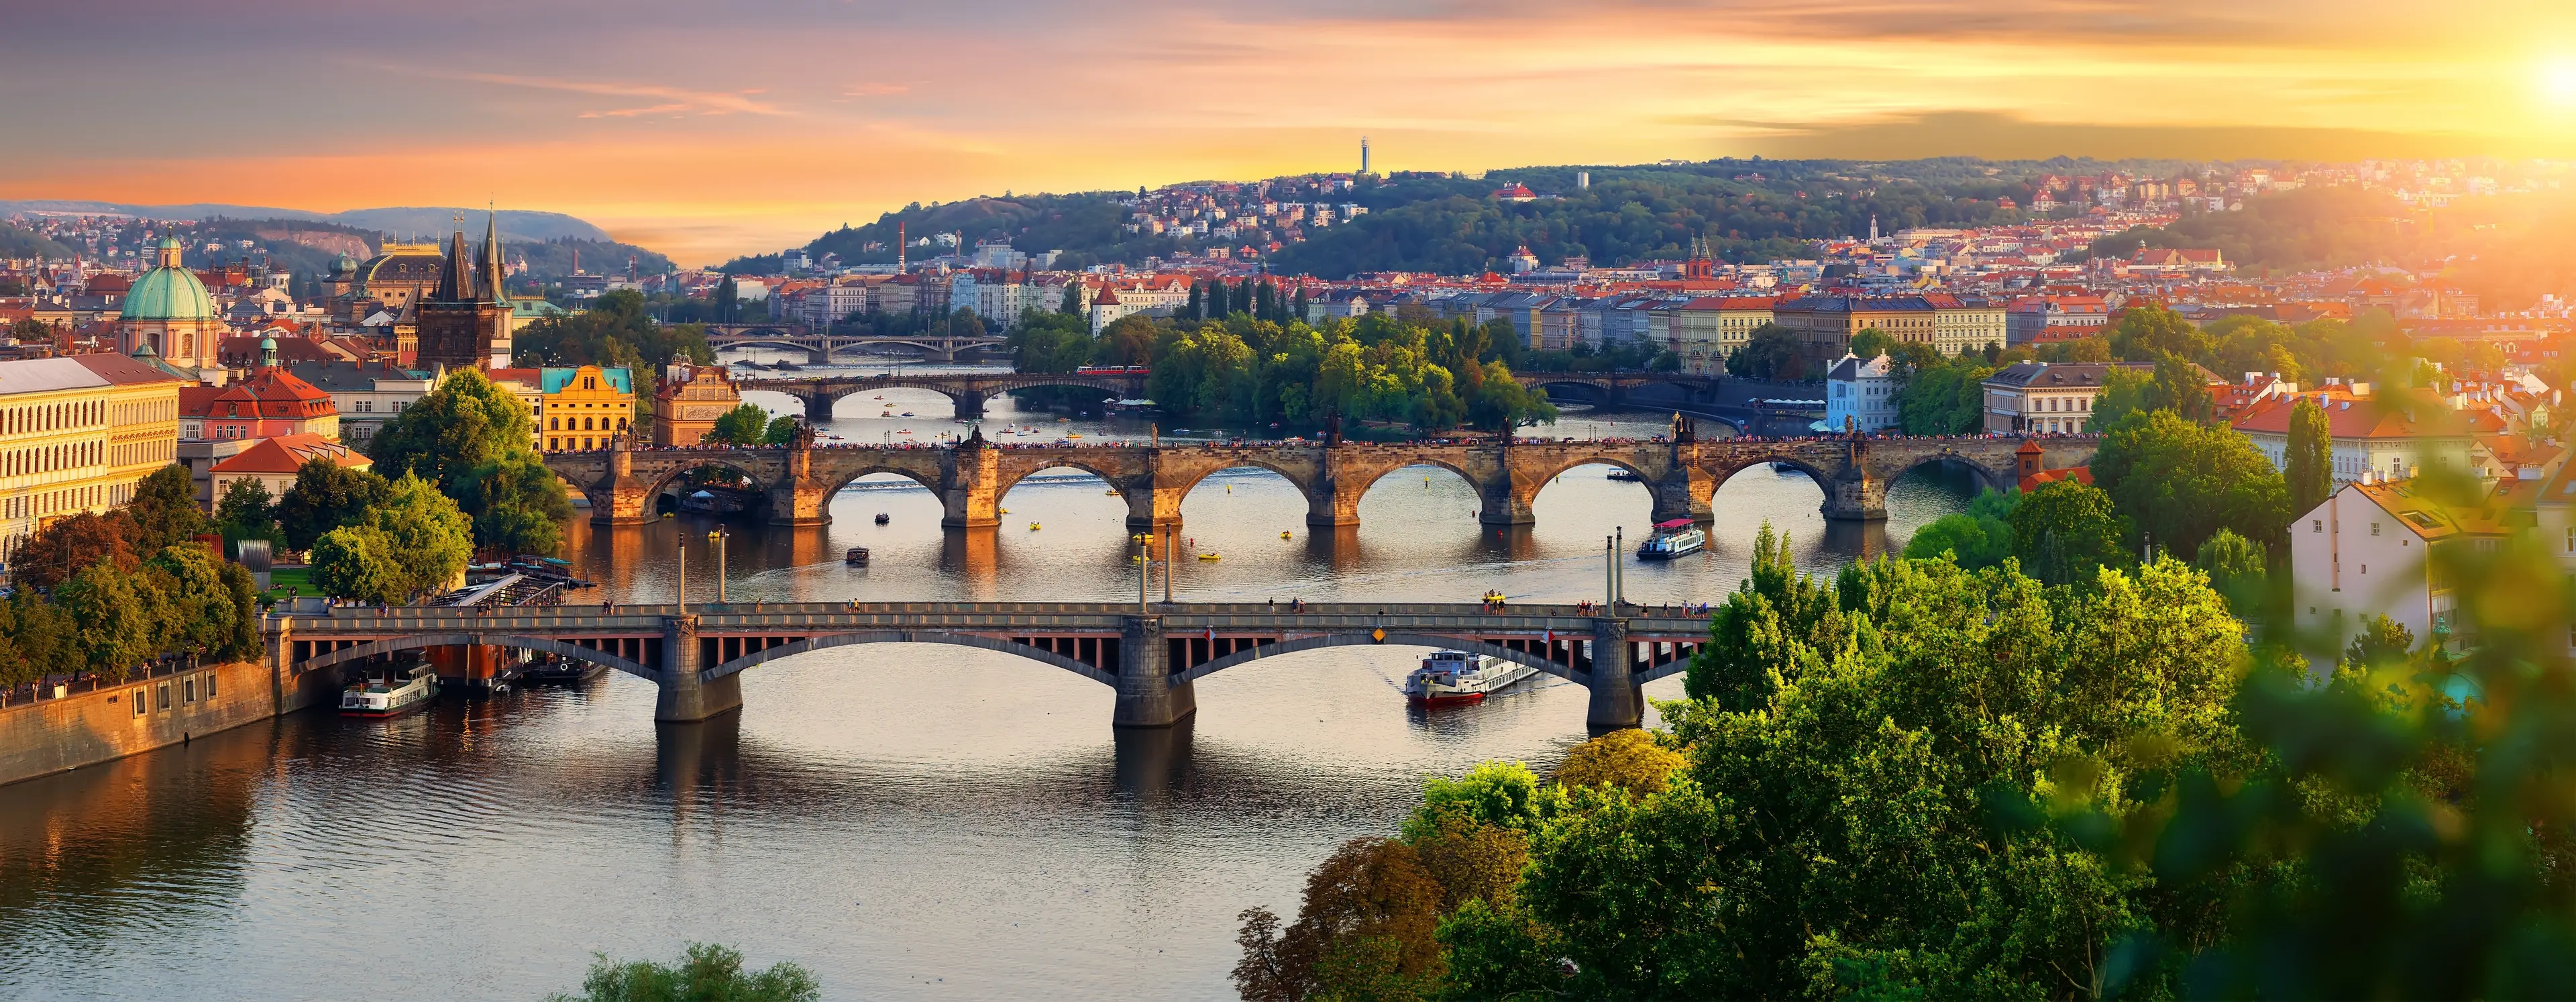 3-Day Local Experience in Prague: Sightseeing, Food & Nightlife With Friends